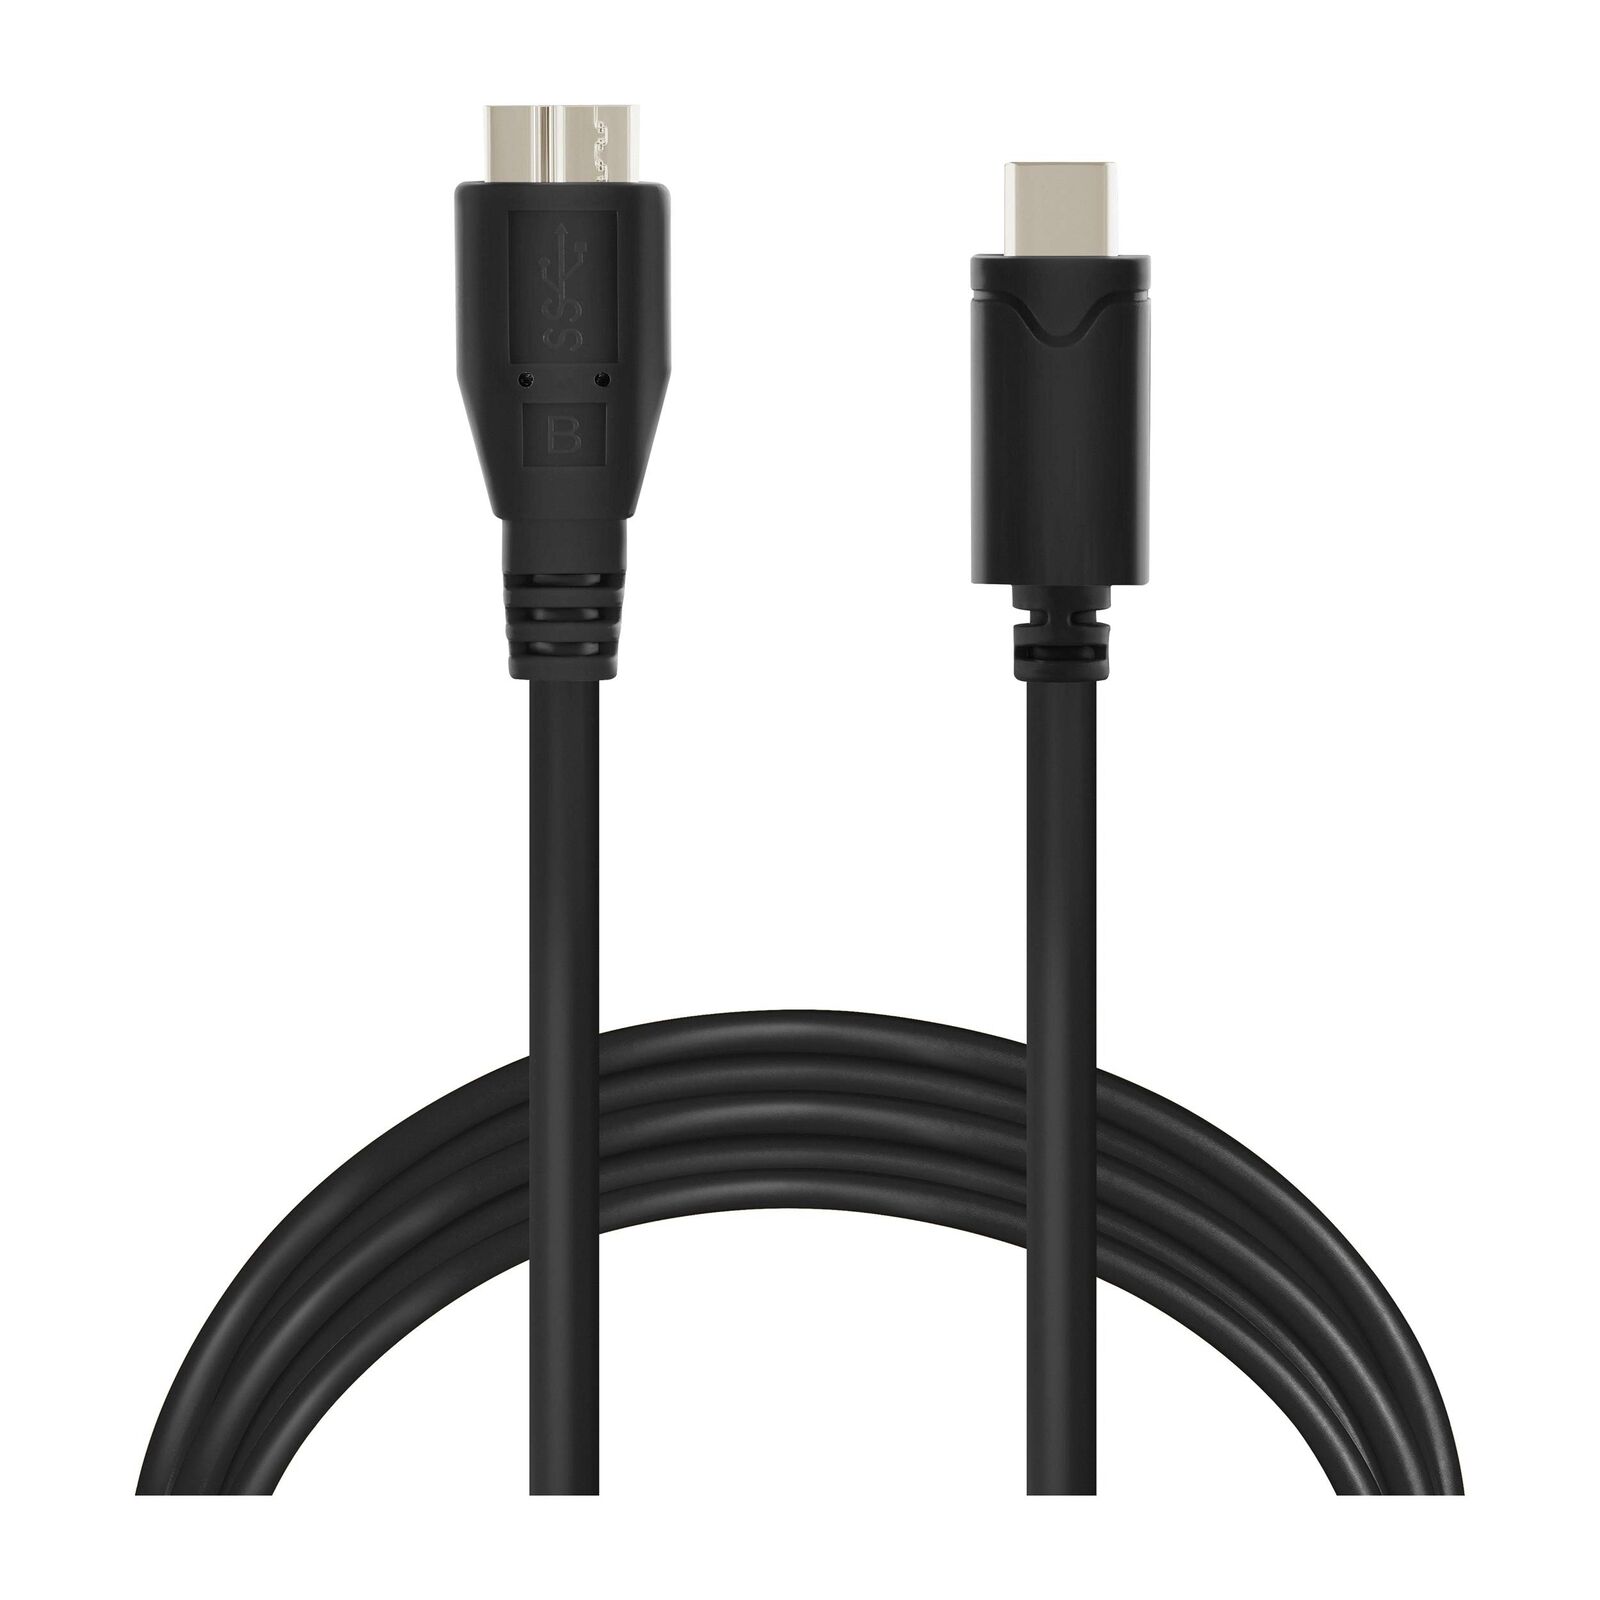 Vebner 20ft USB C to Micro B Cable - Extra Long USB Micro B to USB C